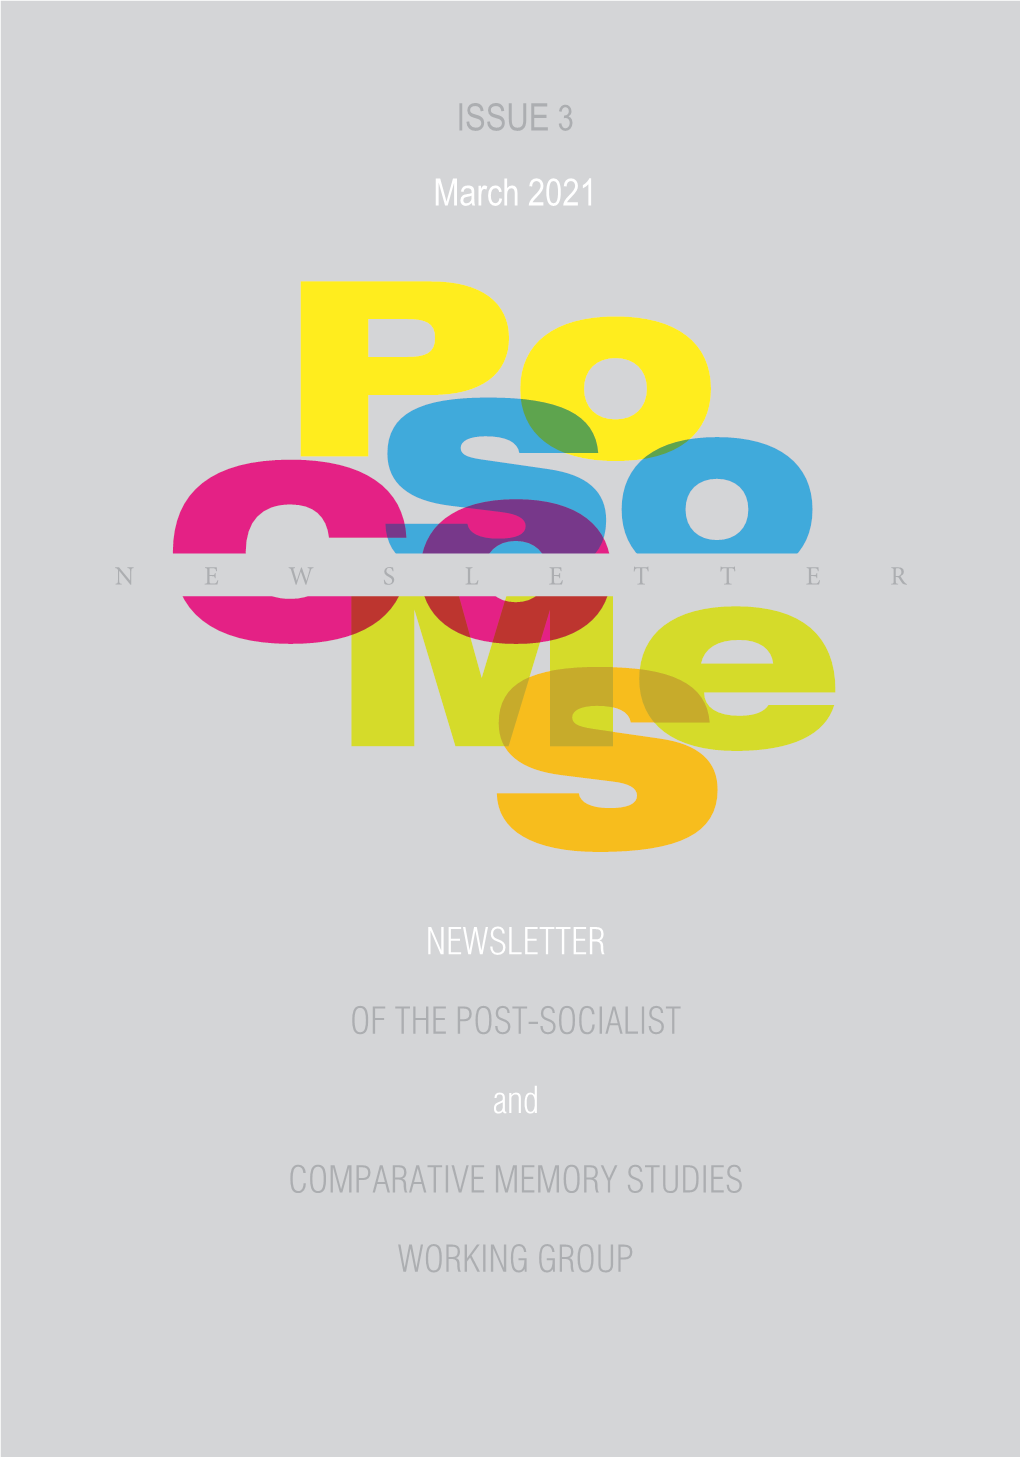 Newsletter of the Post-Socialist and Comparative Memory Studies Working Group